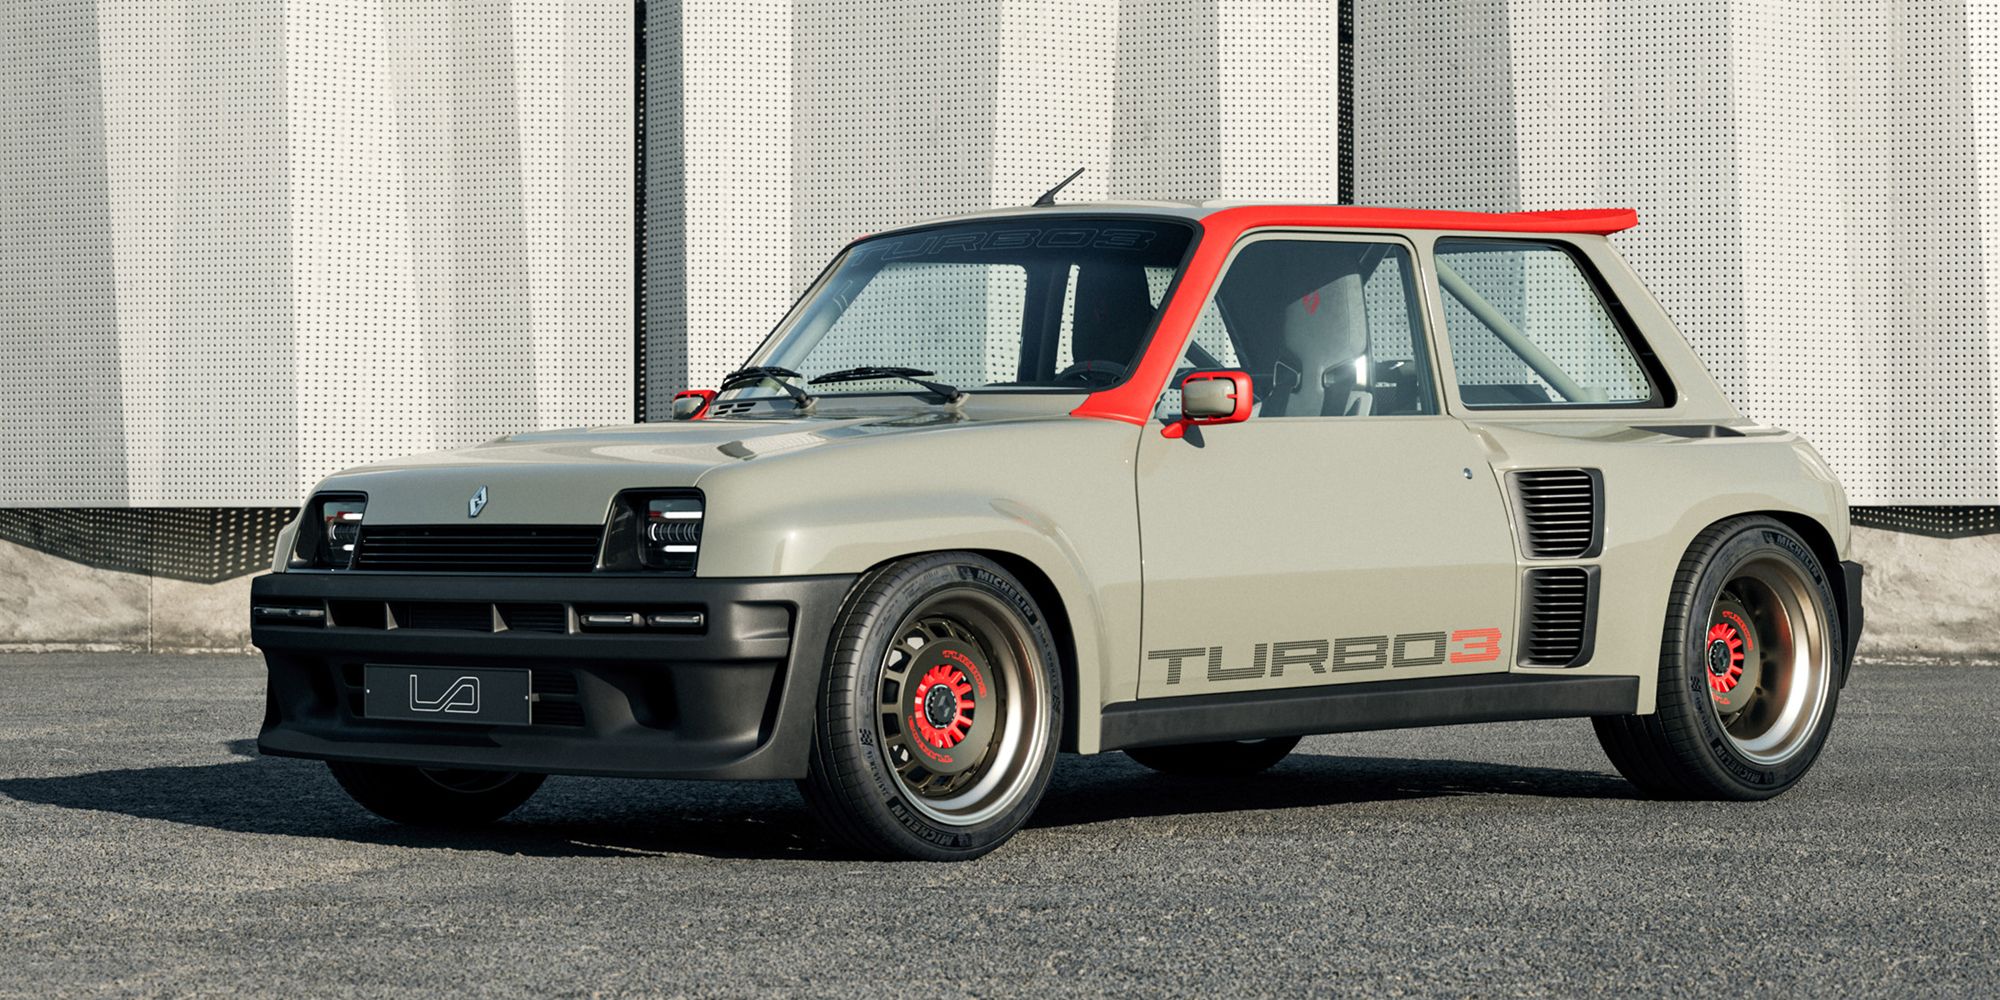 Front 3/4 view of the Legende Turbo 3